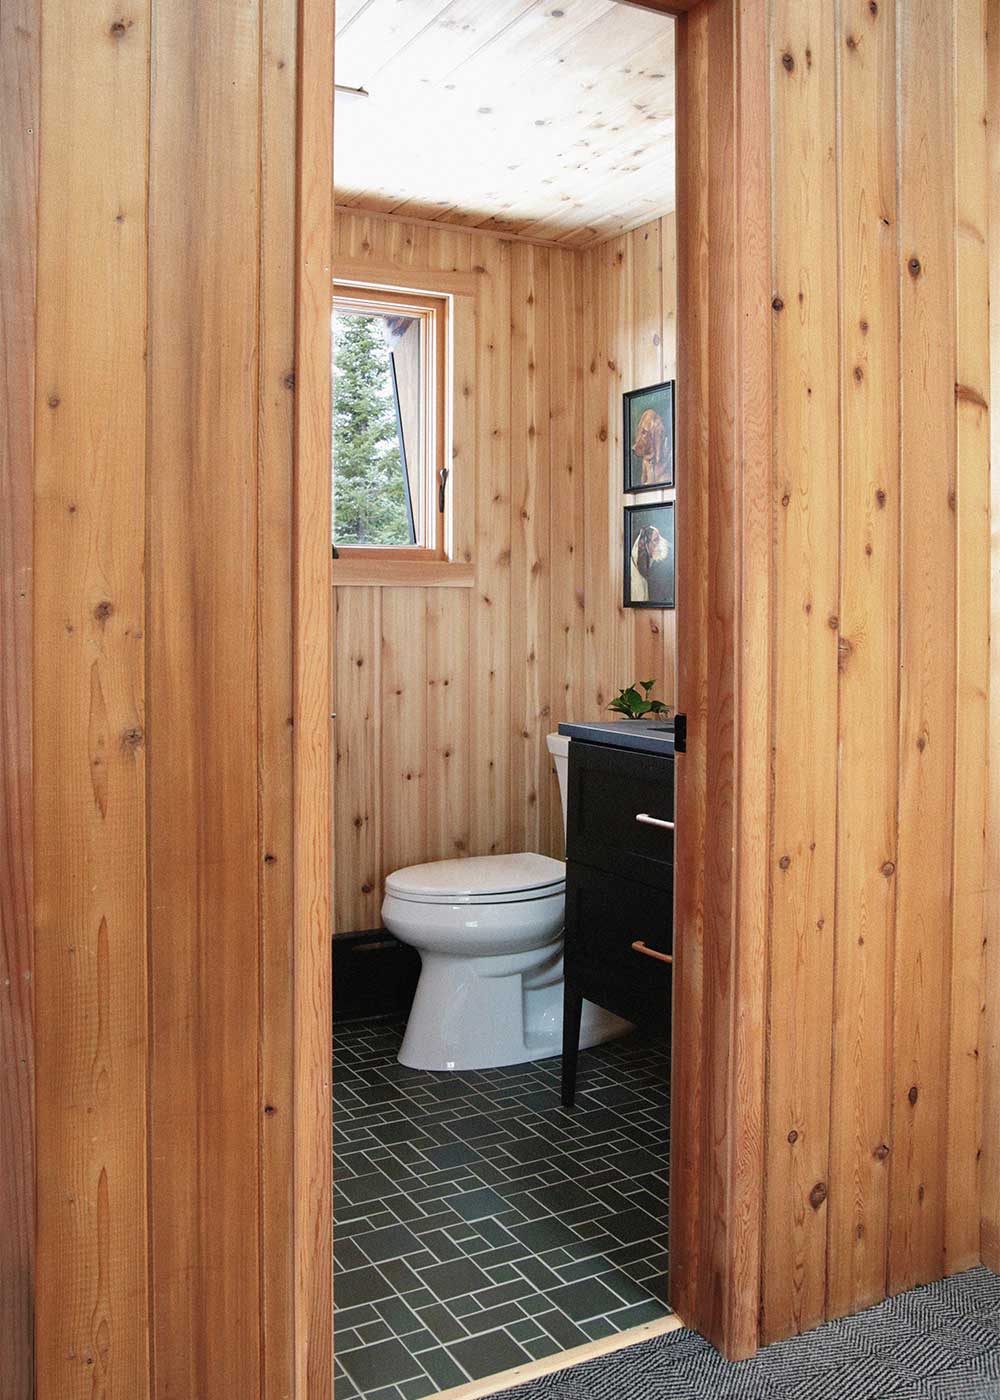 The Minne Stuga upstairs Cabin Bathroom reveal from The Faux Martha with mercuery mosaics tile